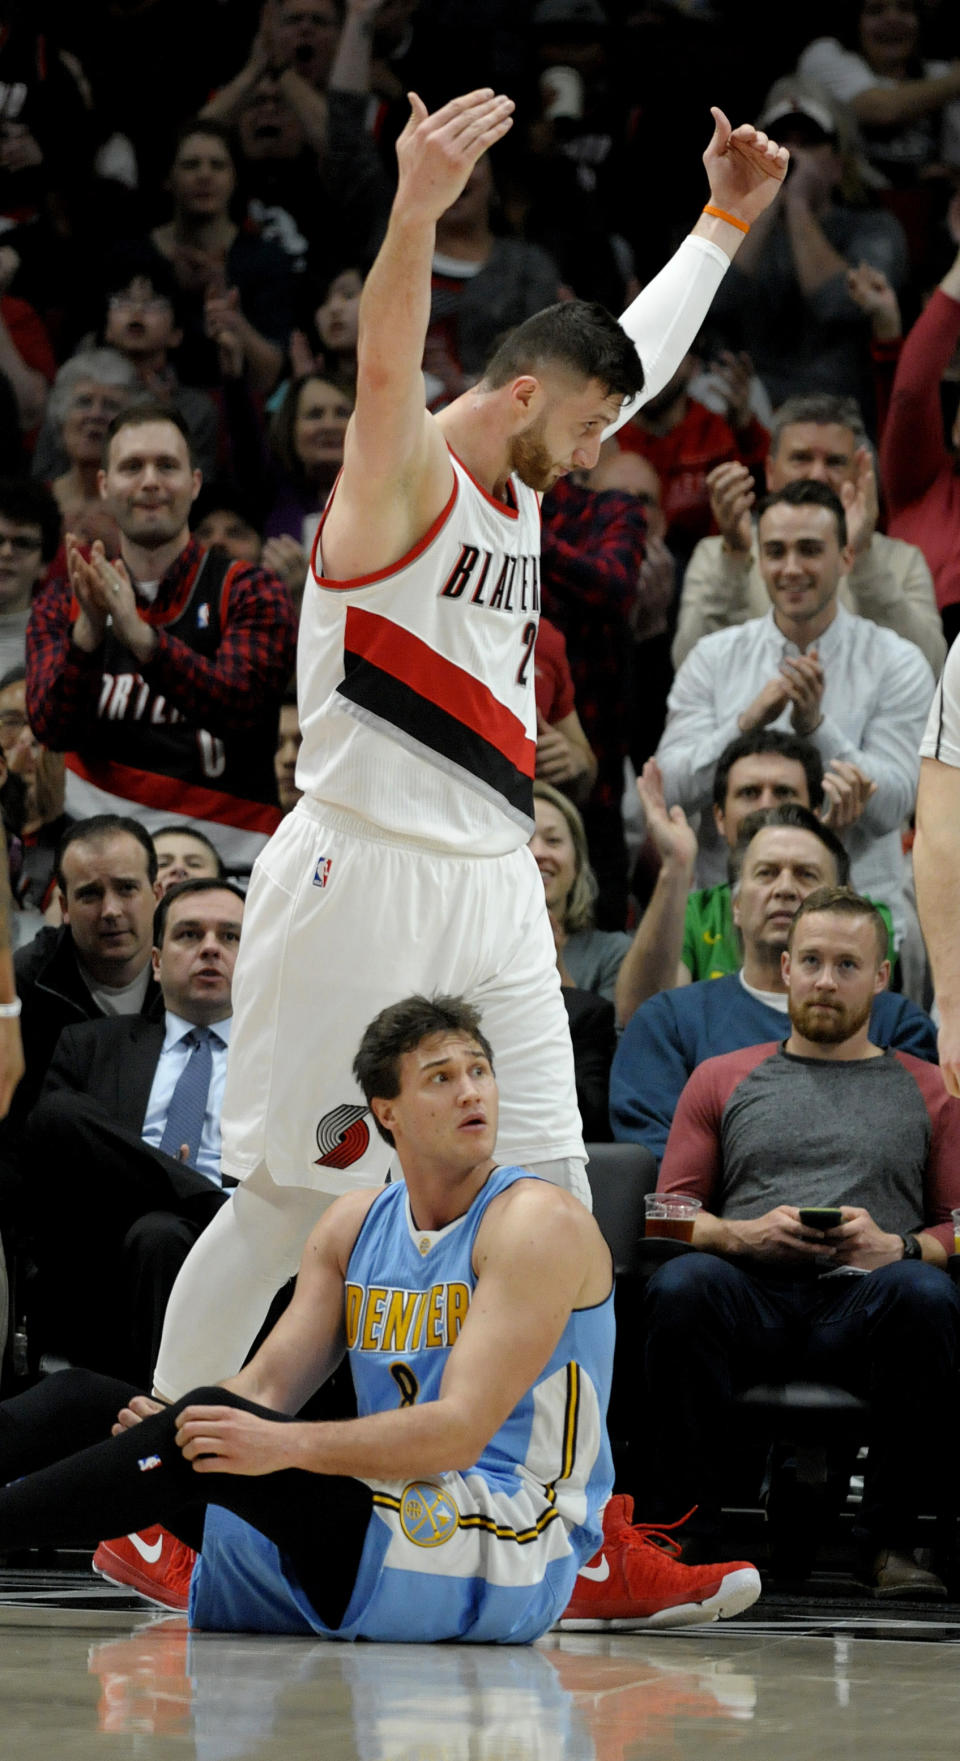 Portland Trail Blazers center Jusuf Nurkic eggs on the crowd after scoring and drawing a foul on Denver Nuggets forward Danilo Gallinari during the first half of an NBA basketball game in Portland, Ore., Tuesday, March 28, 2017. (AP Photo/Steve Dykes)